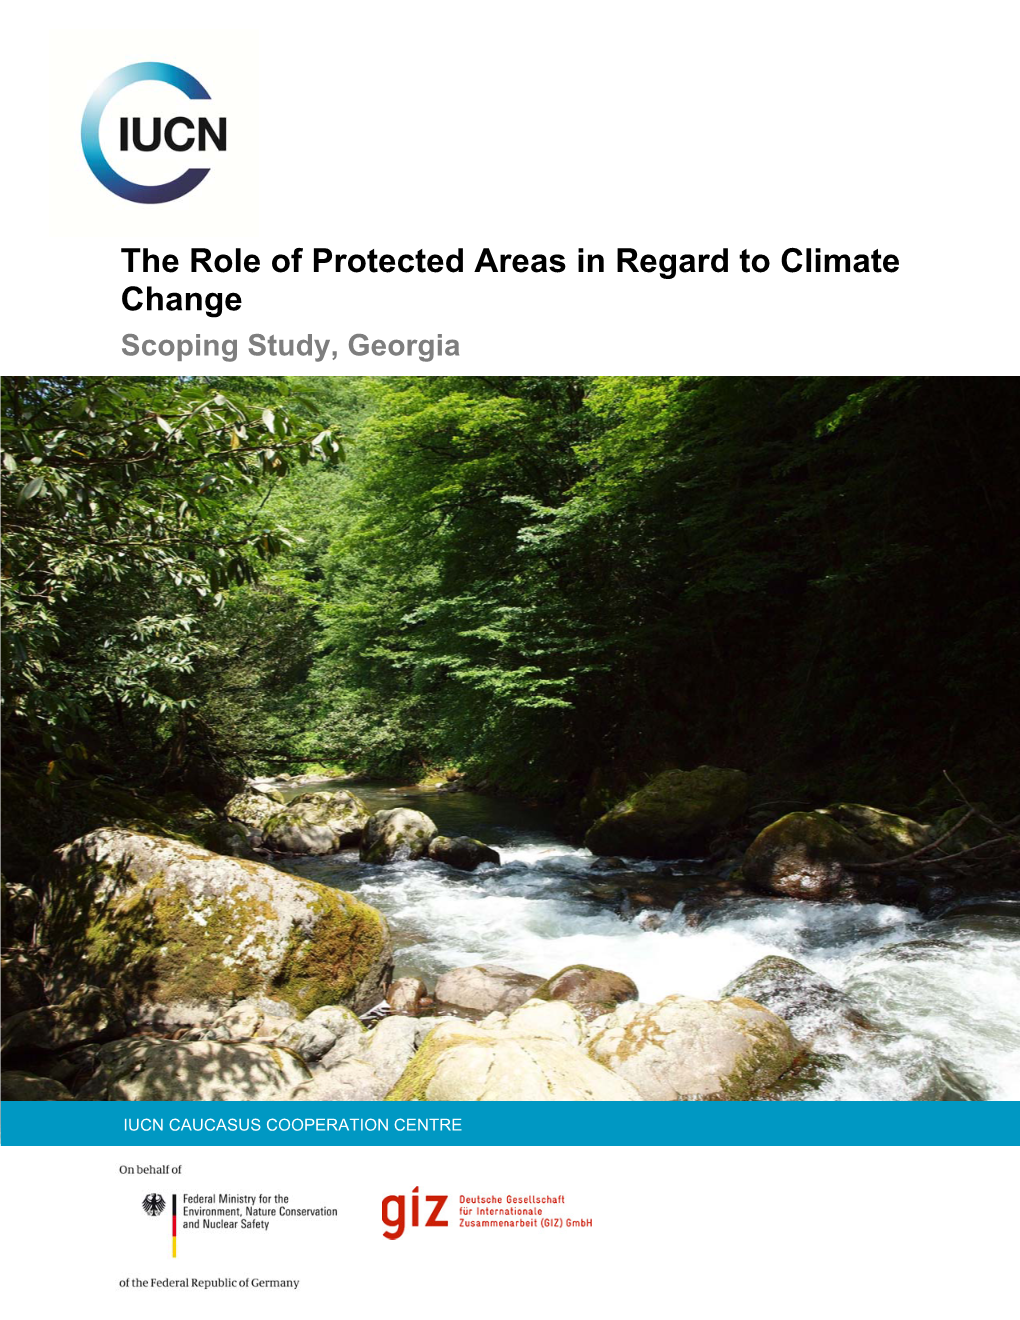 The Role of Protected Areas in Regard to Climate Change Scoping Study, Georgia